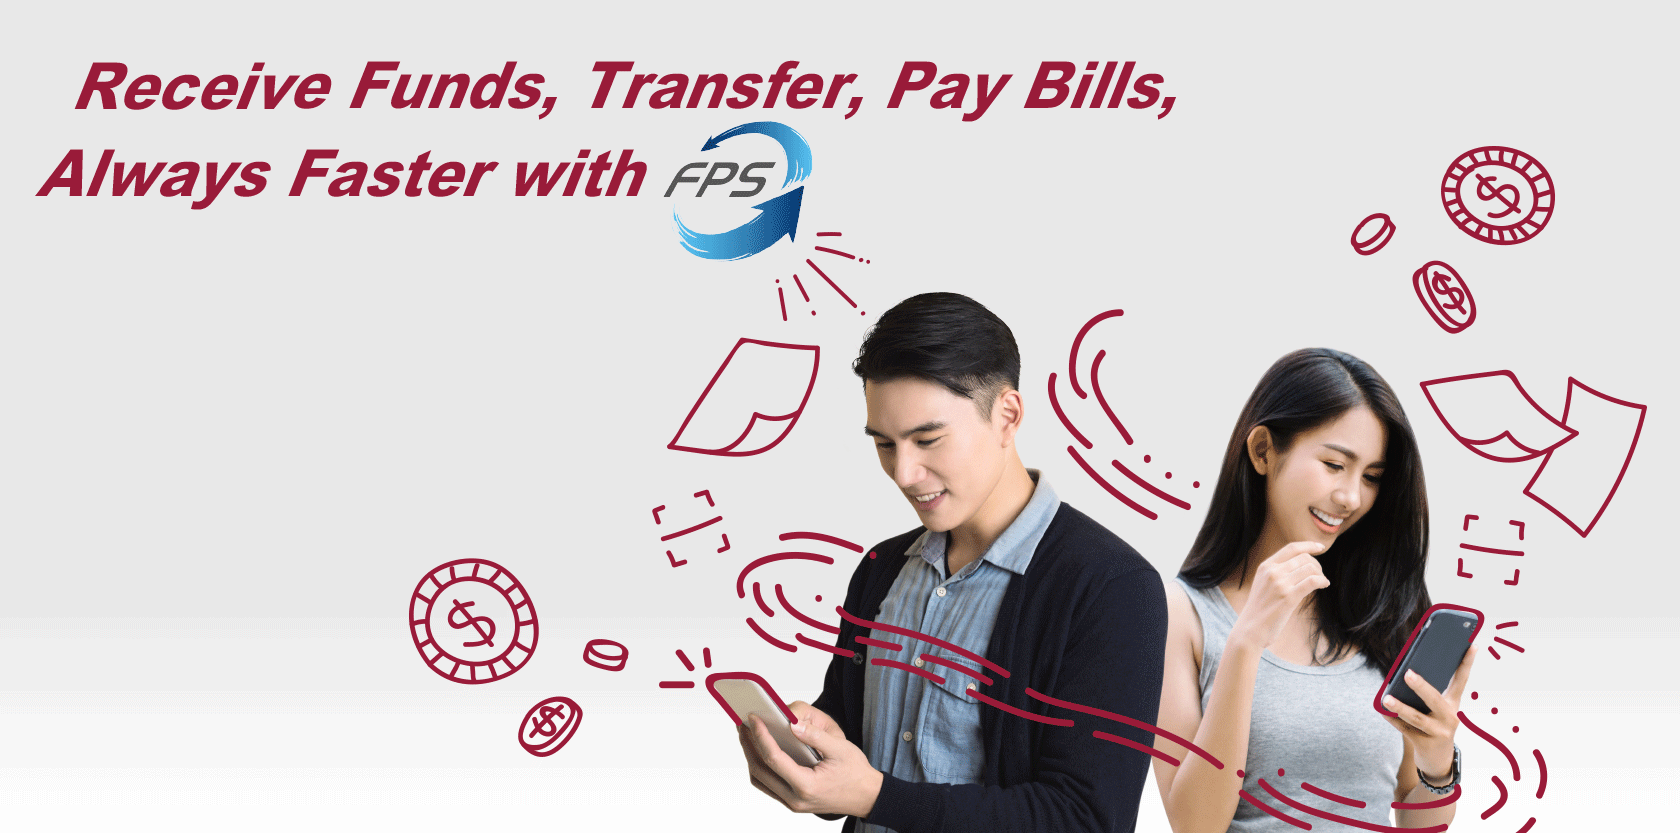 Receive Funds, Transfer, Pay Bills, Always Faster with FPS